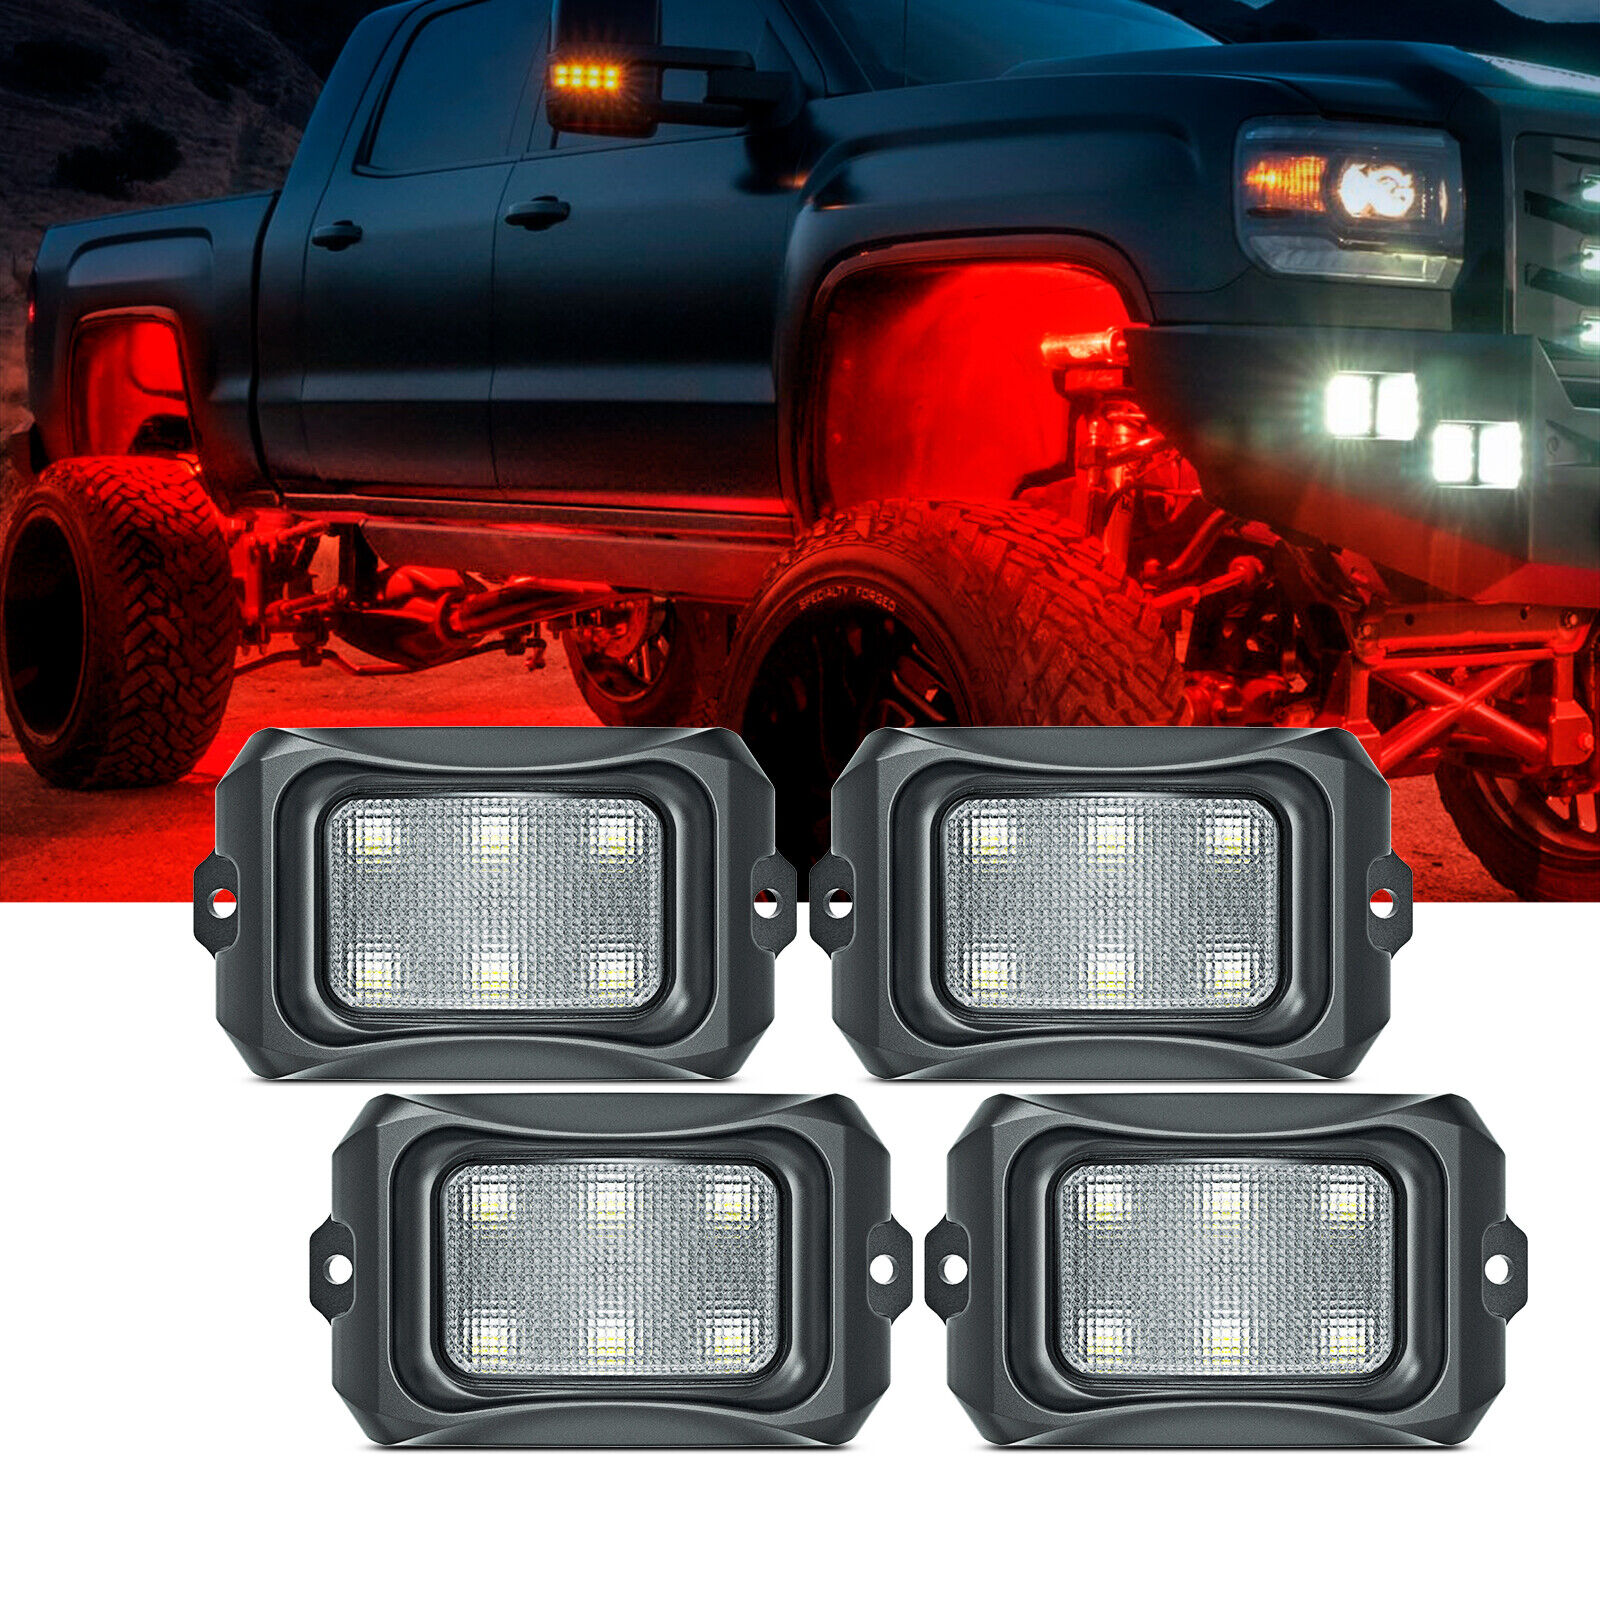 MICTUNING C2 LED Rock Light Pure Red 4 Pods IP68 Underglow Glow